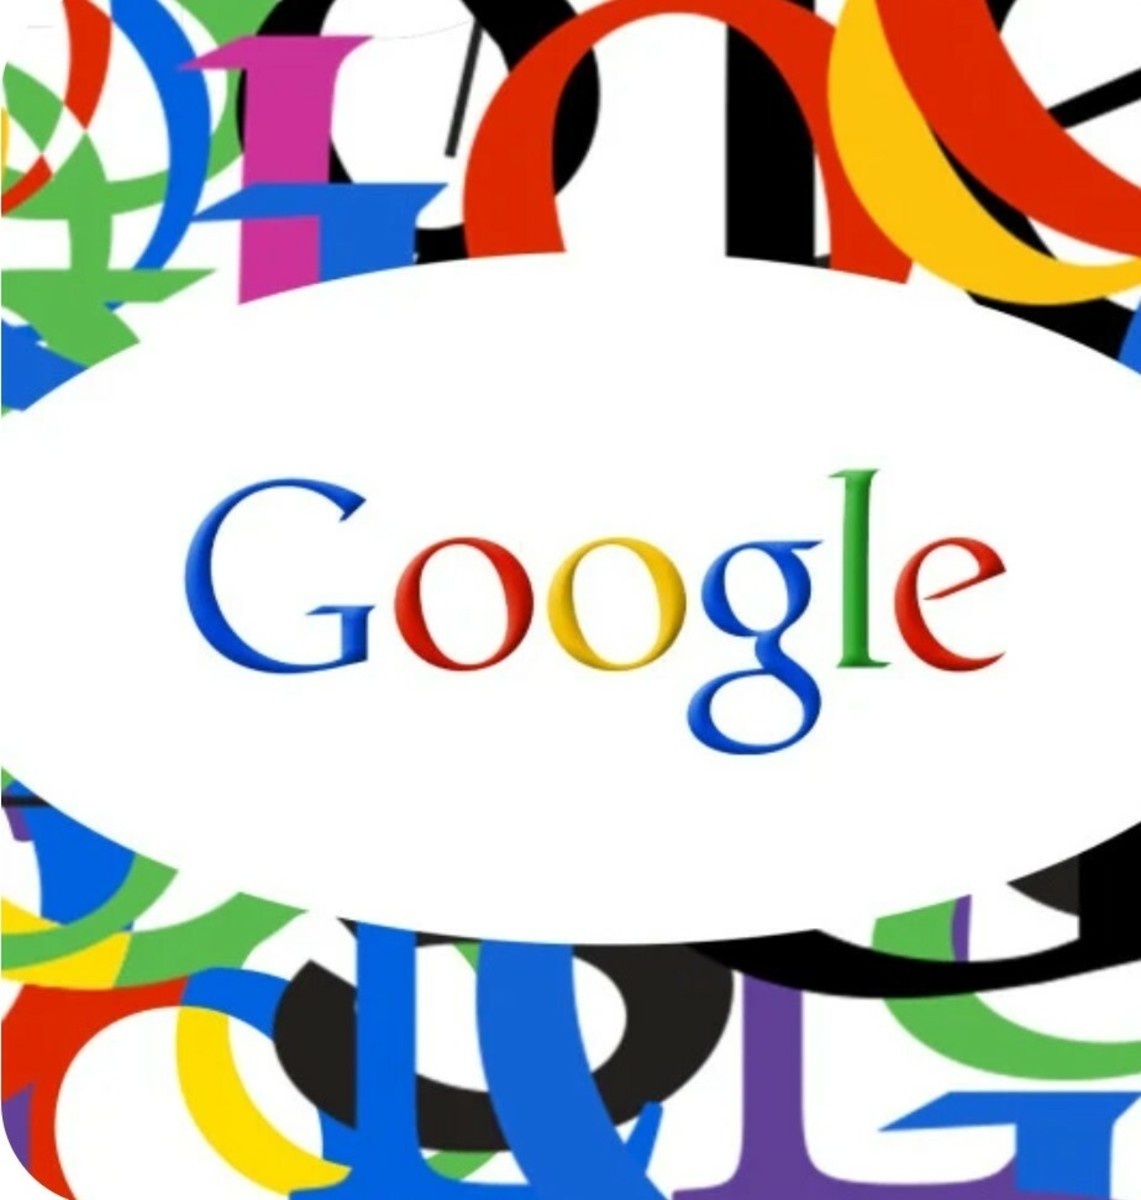 Complete A - Z List of Google Software, Products & Services. Discover Everything Google.